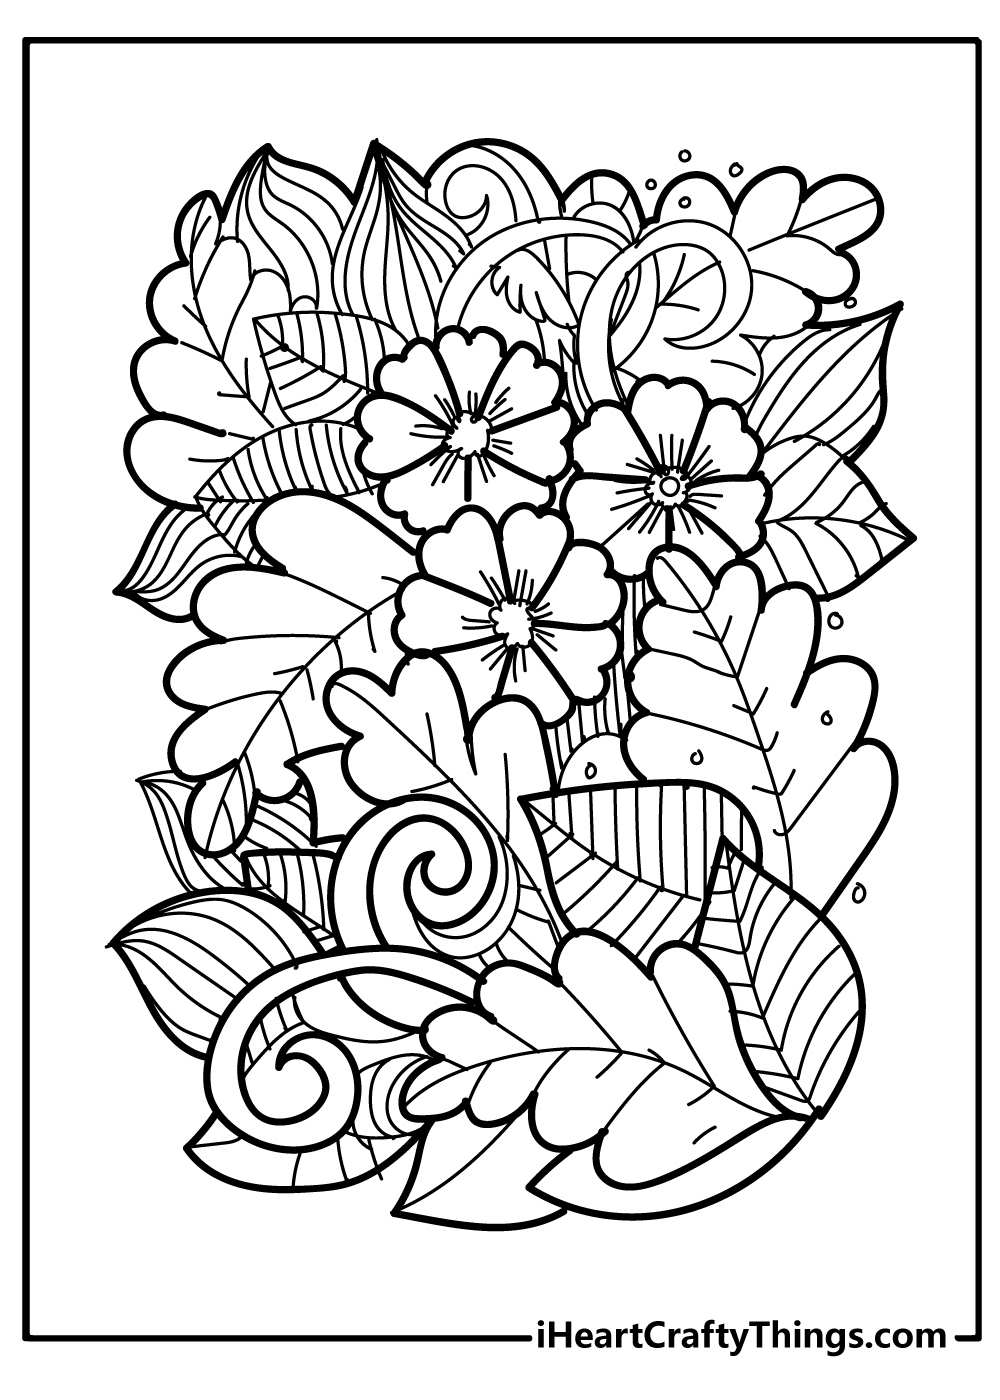 Fall Coloring Sheet for children free download